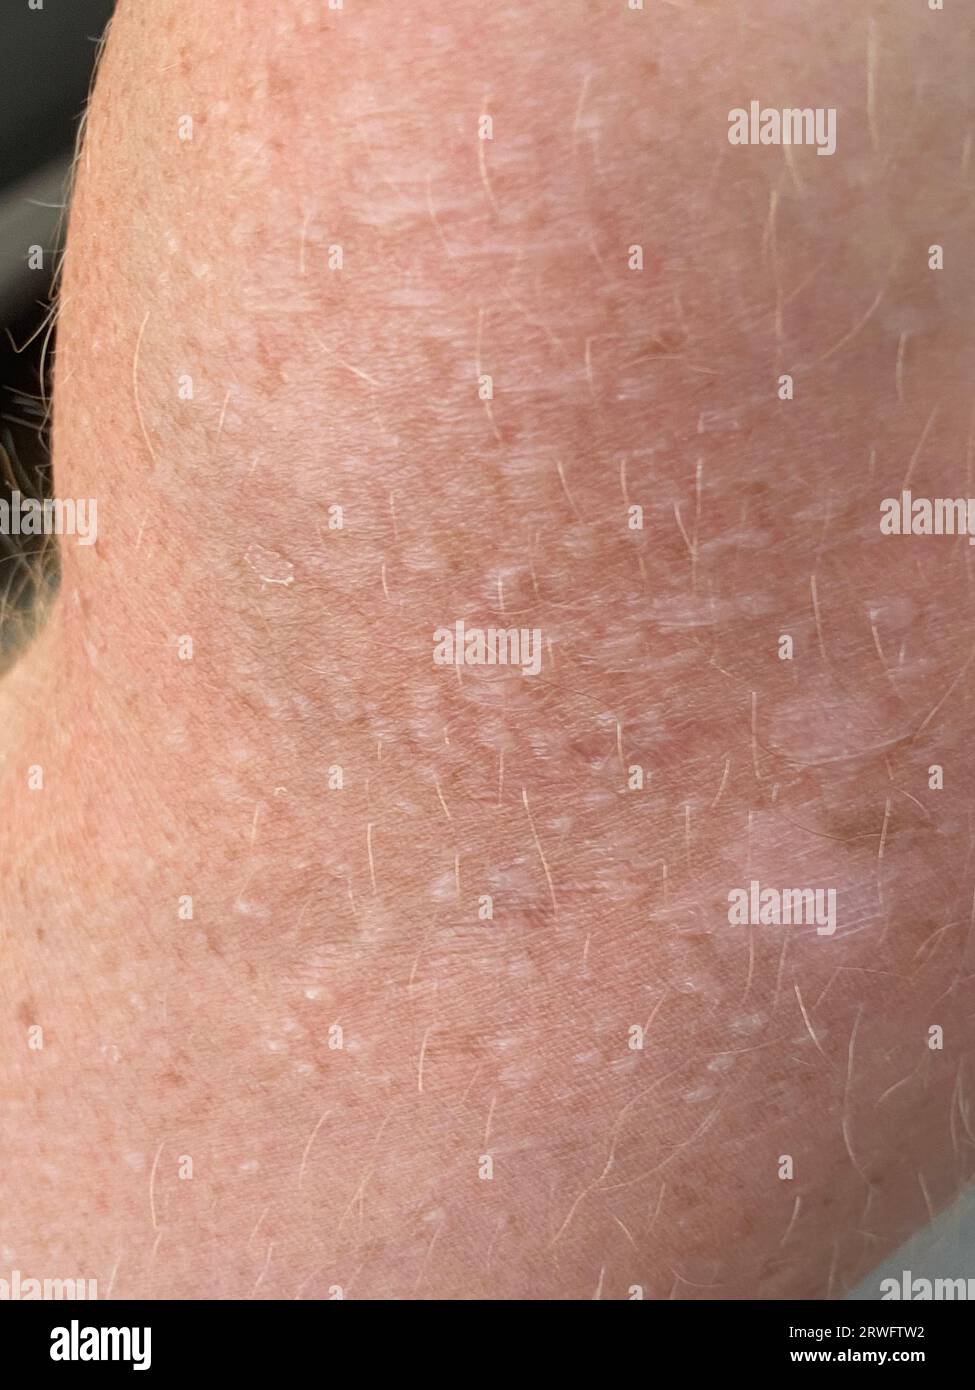 Close up on blistered skin damaged by sun exposure. Stock Photo